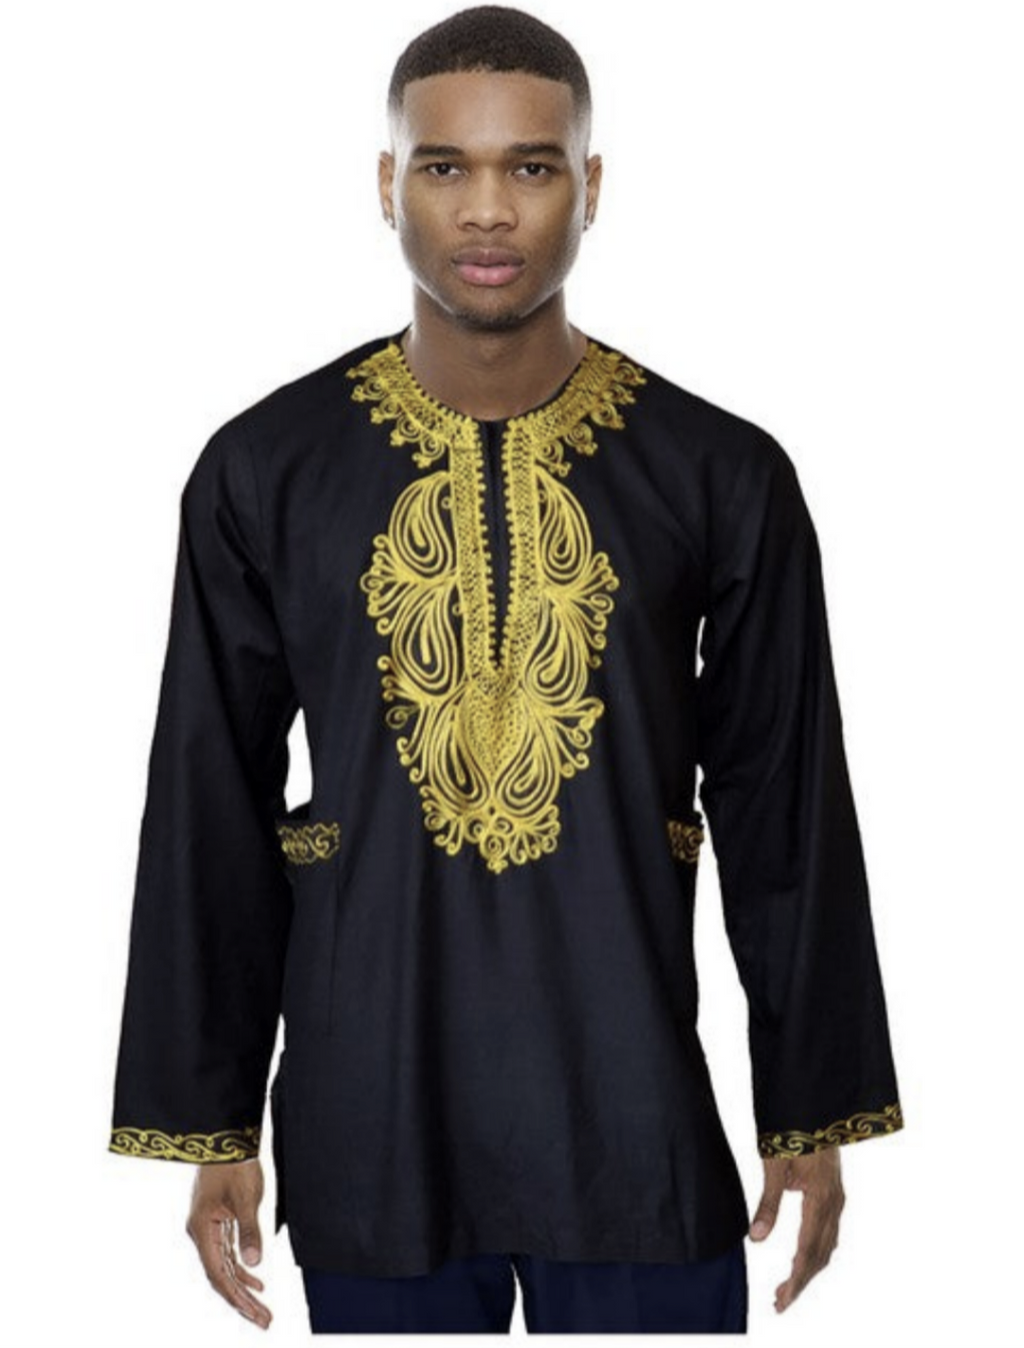 Black Cotton Long Sleeve Dashiki Shirt with Gold Embroidery DP3781MLS